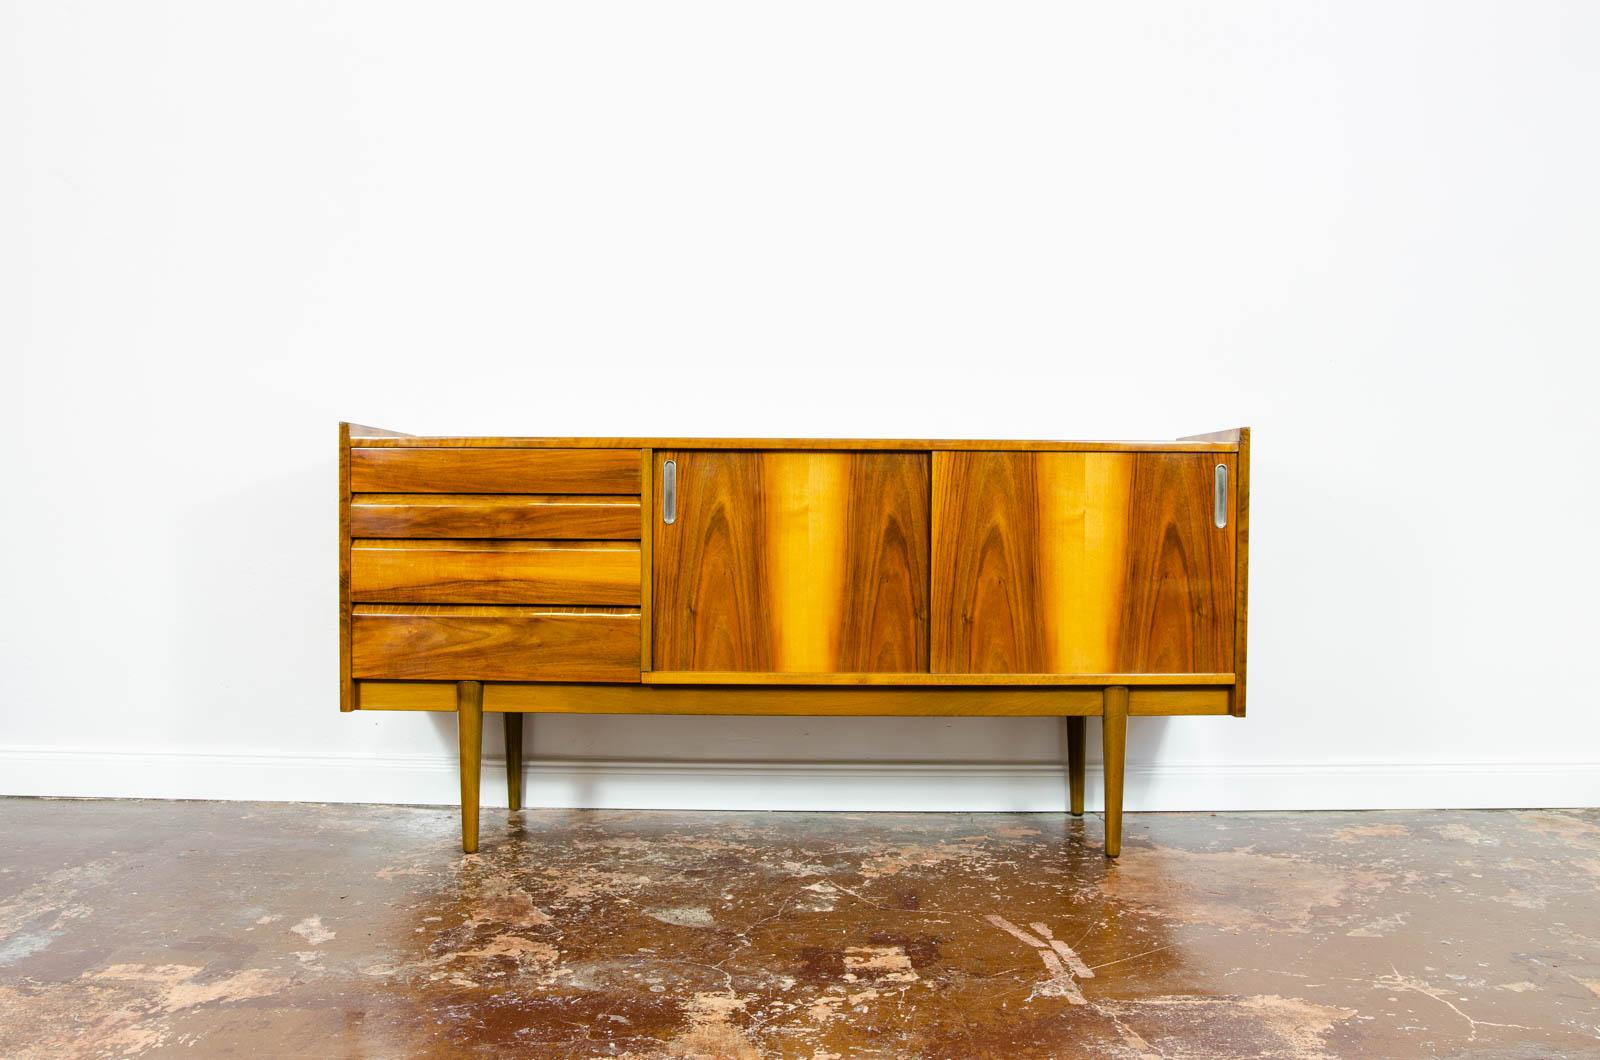 Mid-century vintage walnut high-gloss sideboard from Bytomskie Furniture Factory, Poland, 1960s.
Sideboard is walnut veneered, finished in original high gloss finish.
Credenza has four drawers, sliding doors with metal handles and two internal